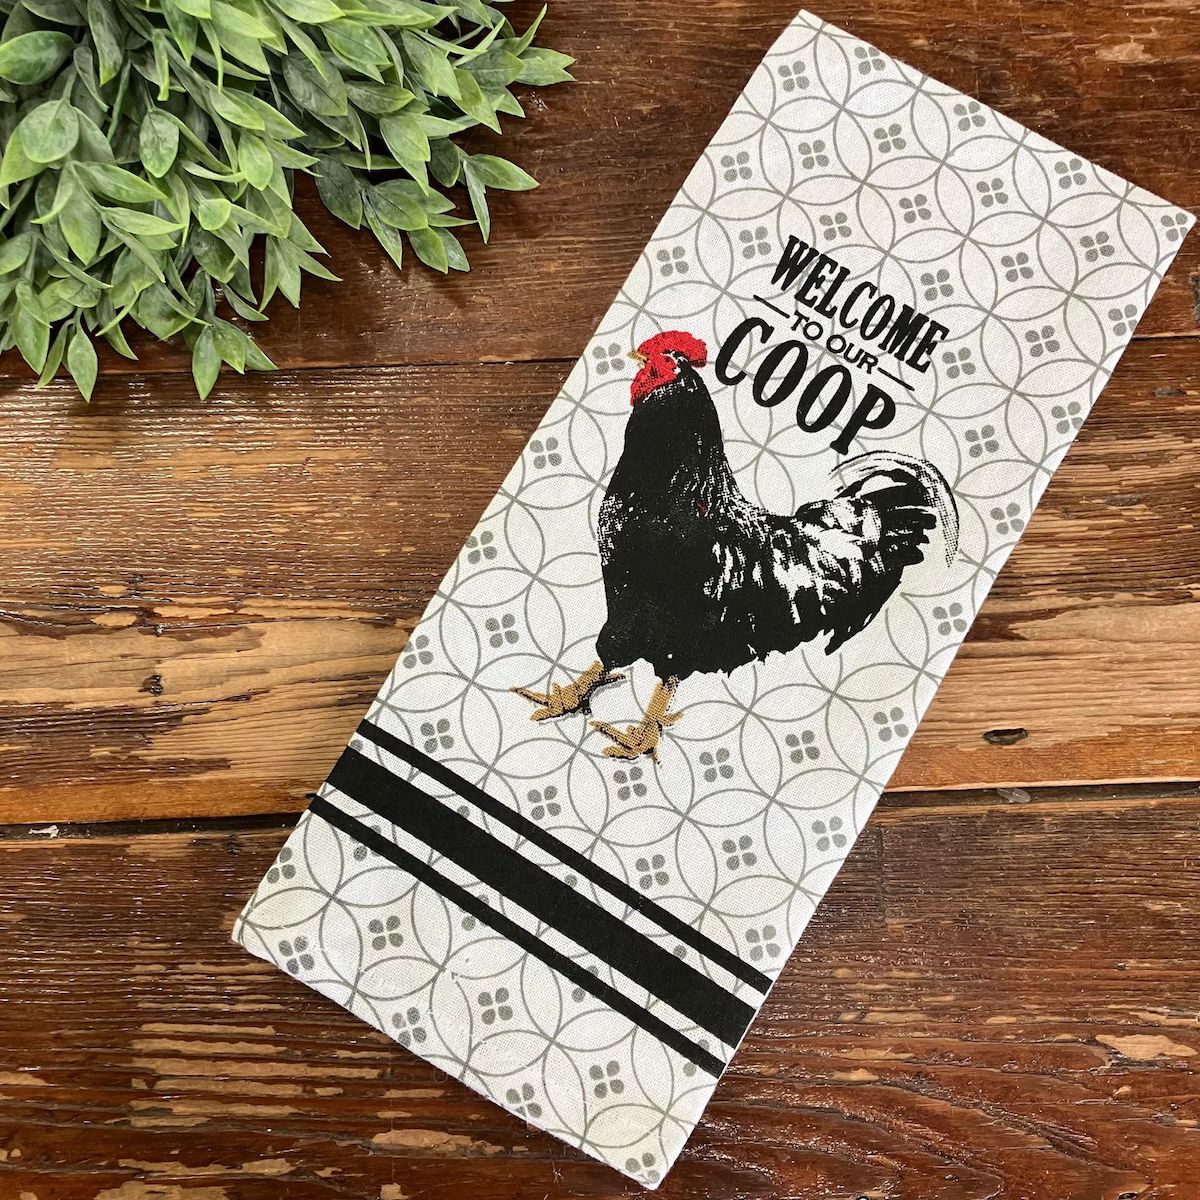 Welcome to our Coop Kitchen Towel